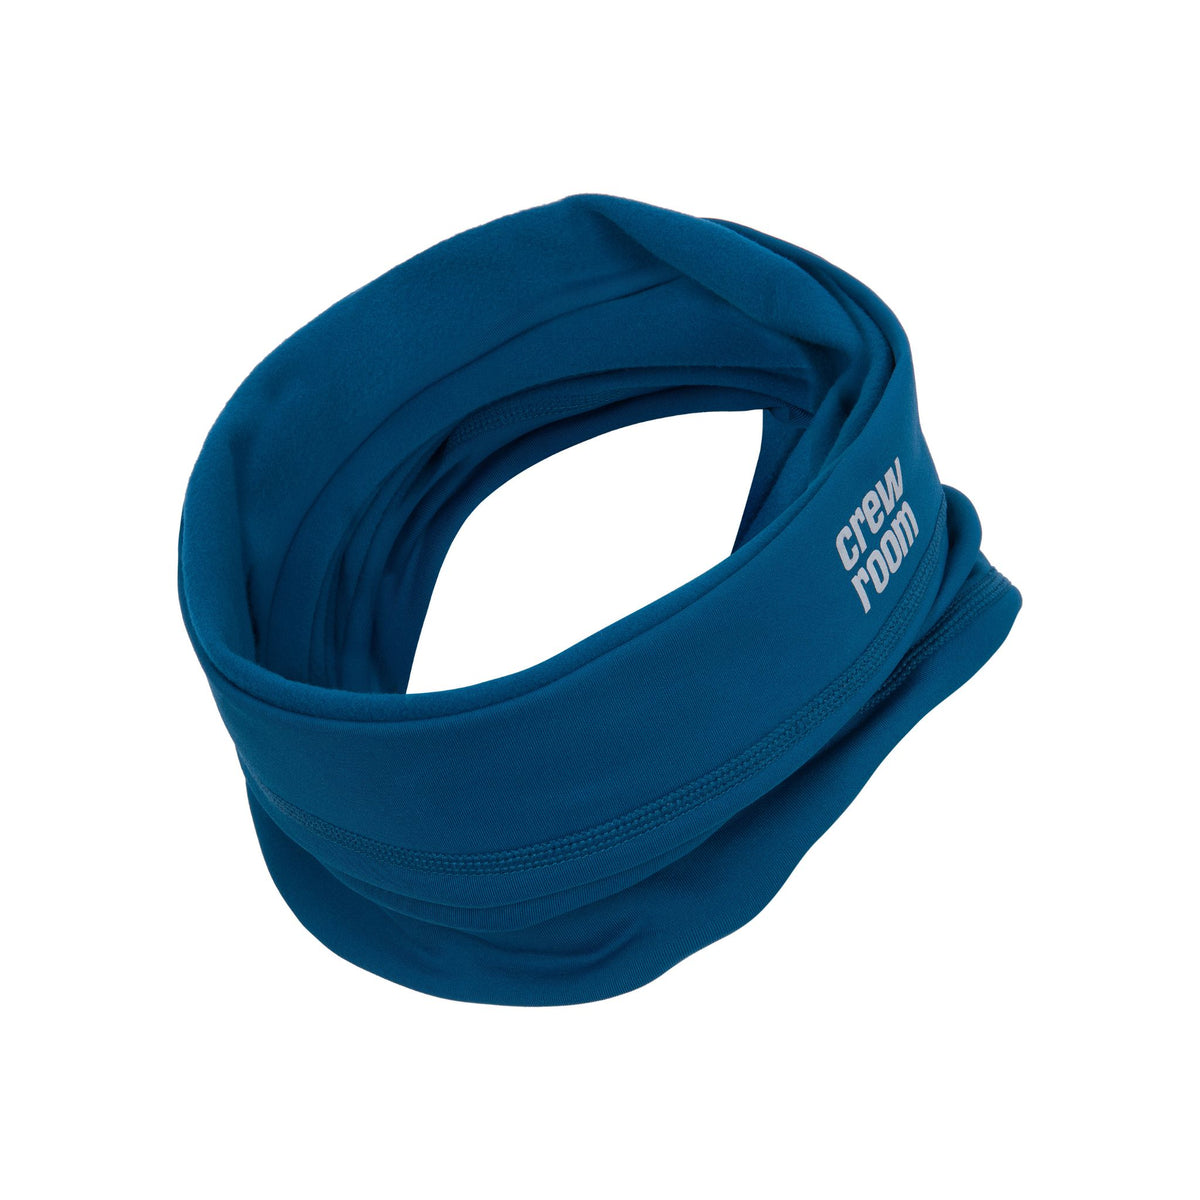 The H20 Classic Snood